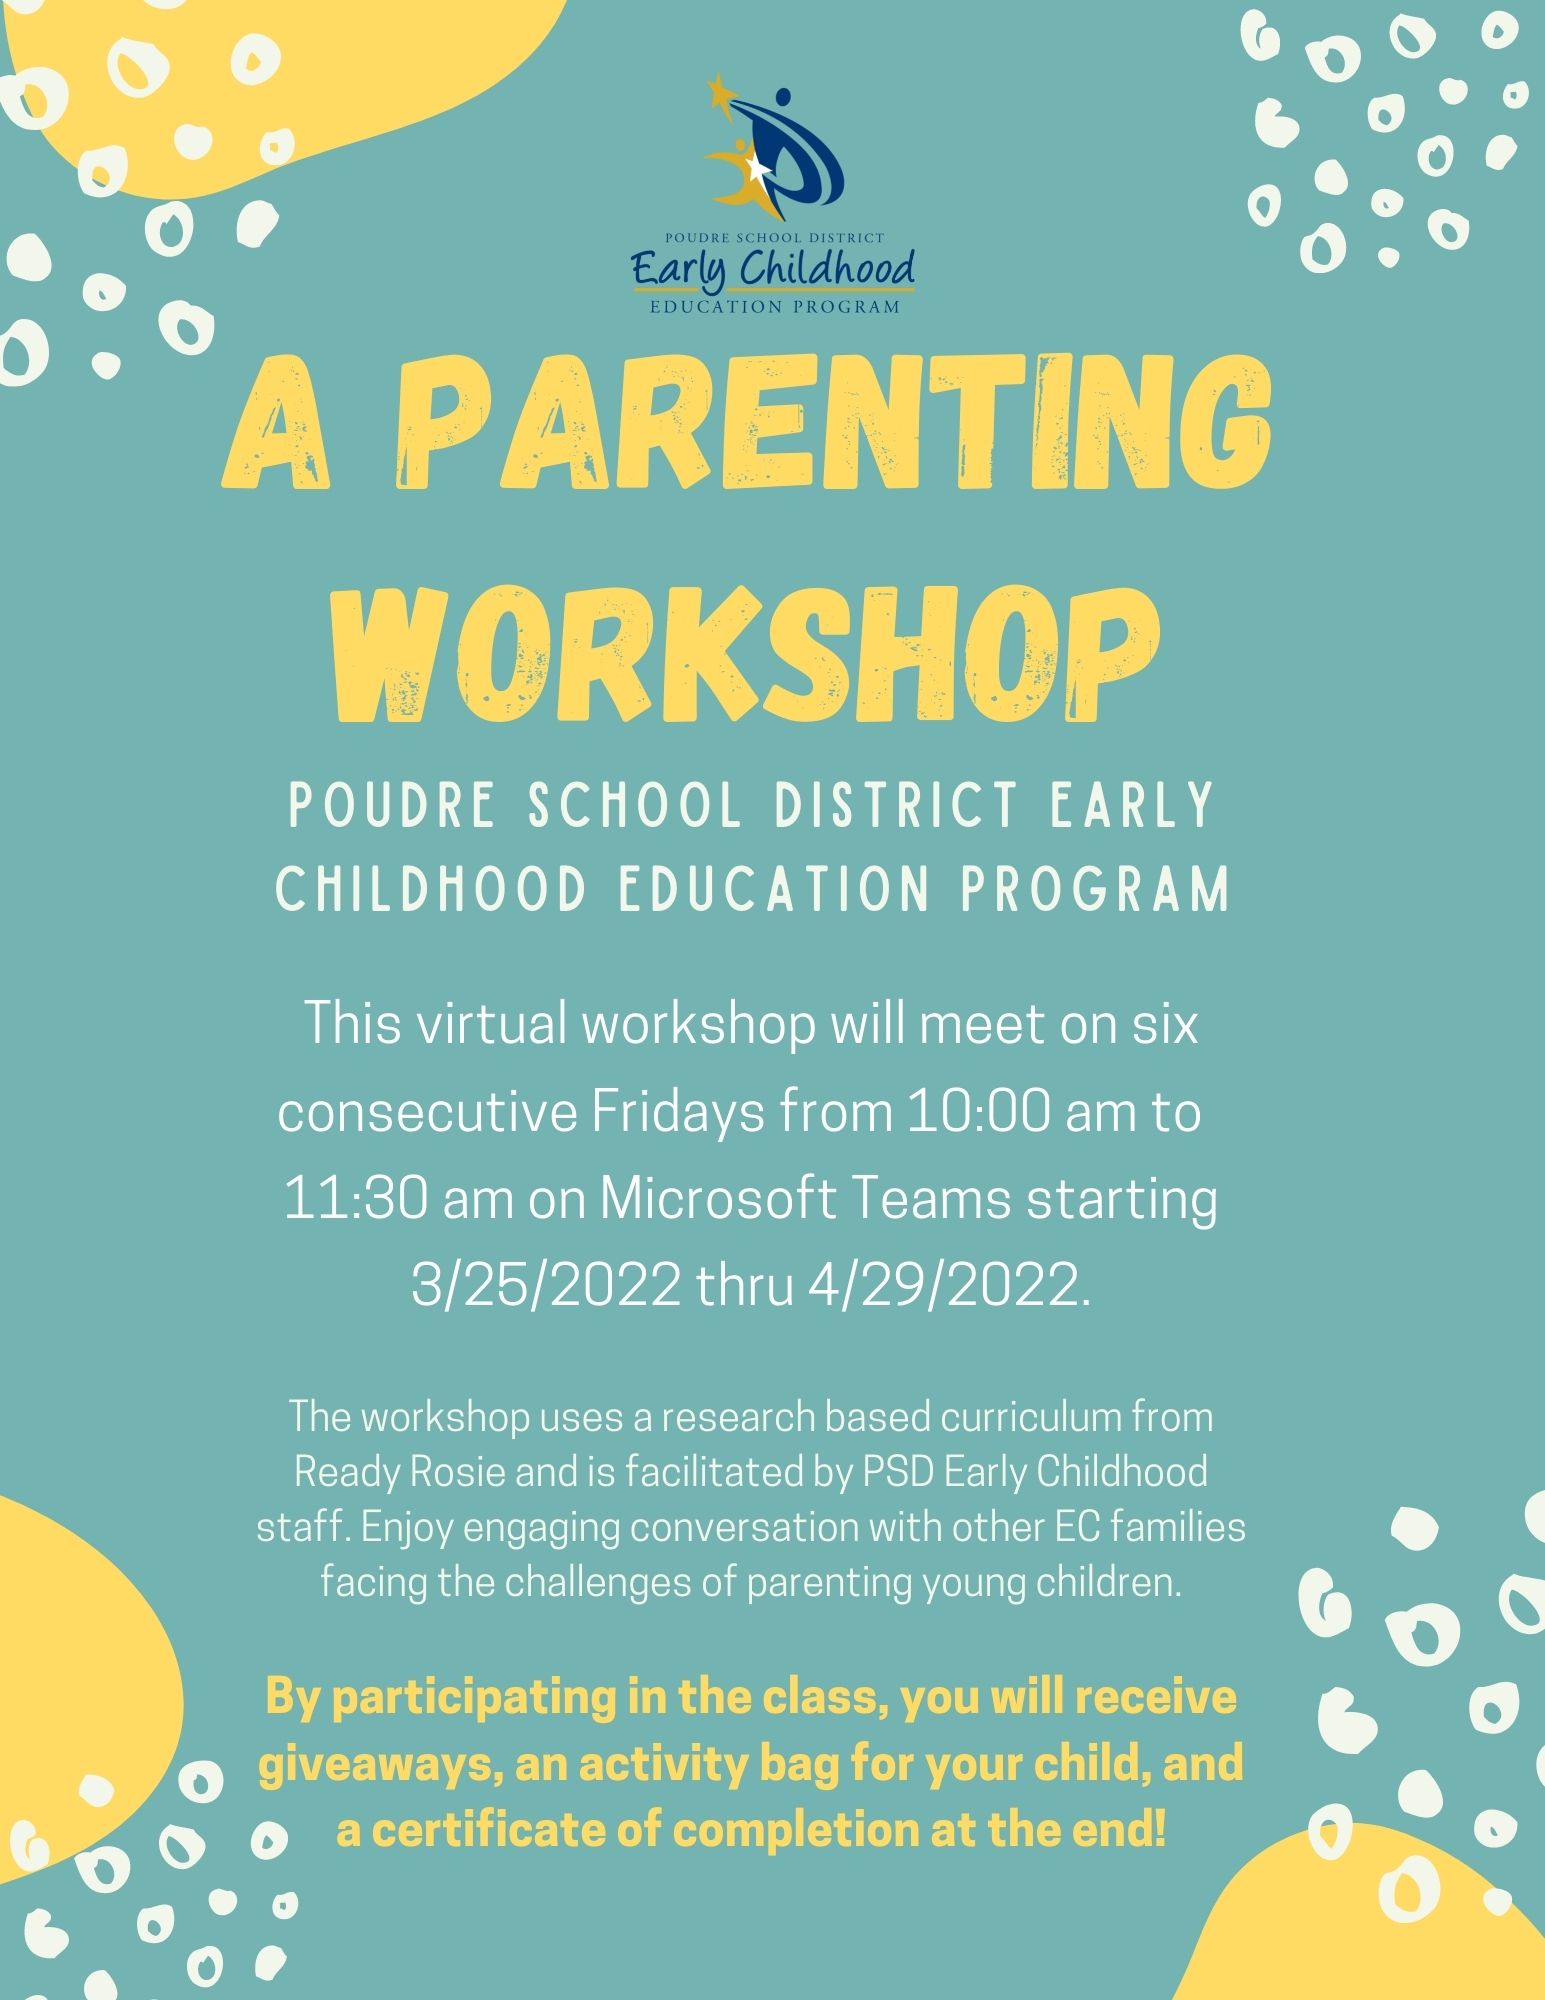 Parent Workshop Schedule - This virtual workshop will meet on six consecutive Fridays from 10:00 am to  11:30 am on Microsoft Teams starting 3/25/2022 thru 4/29/2022.